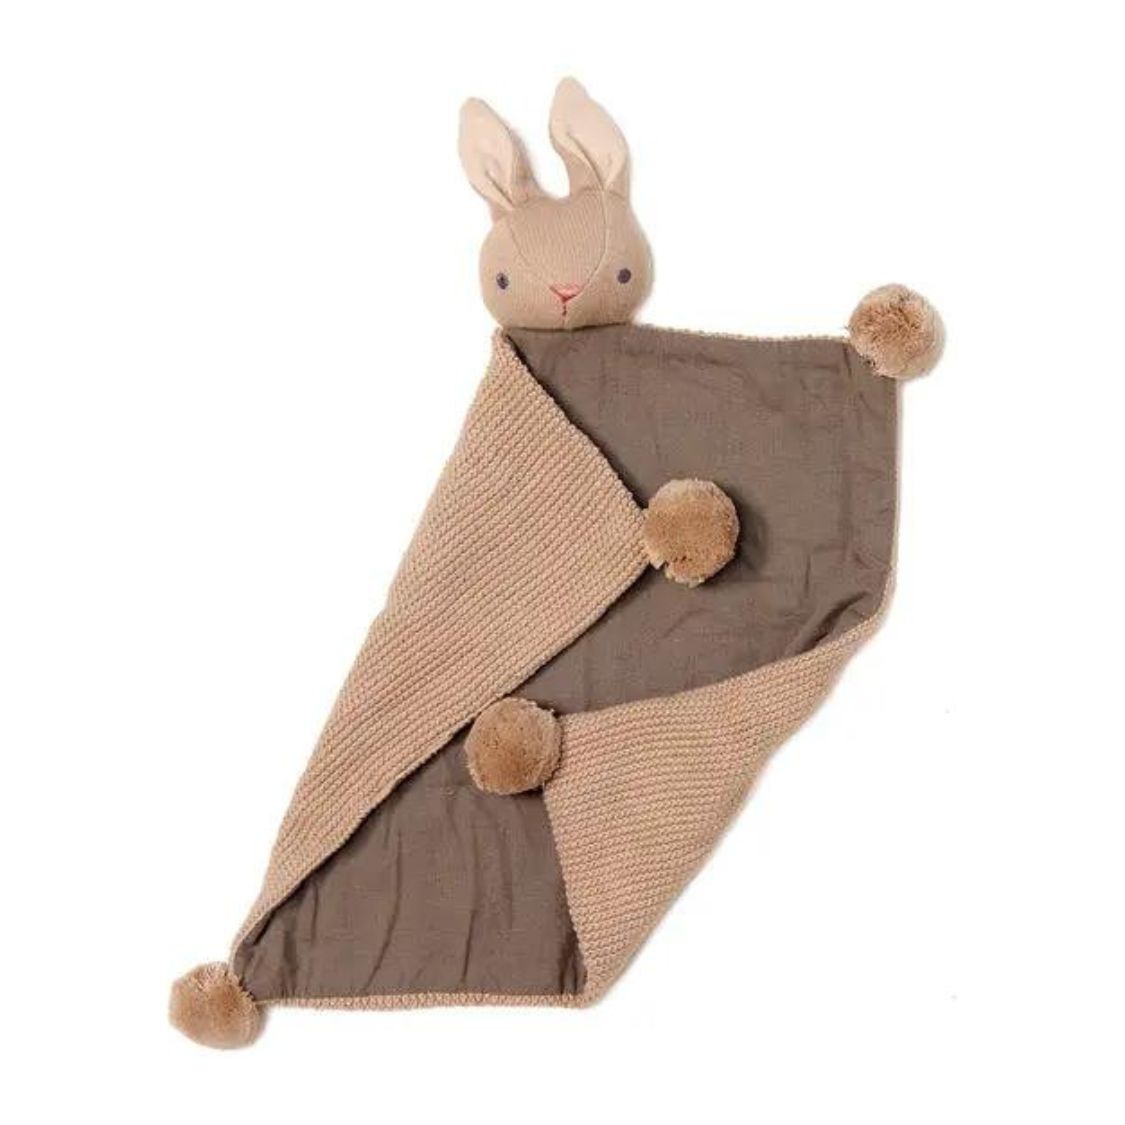 Soft taupe organic bunny comforter toy